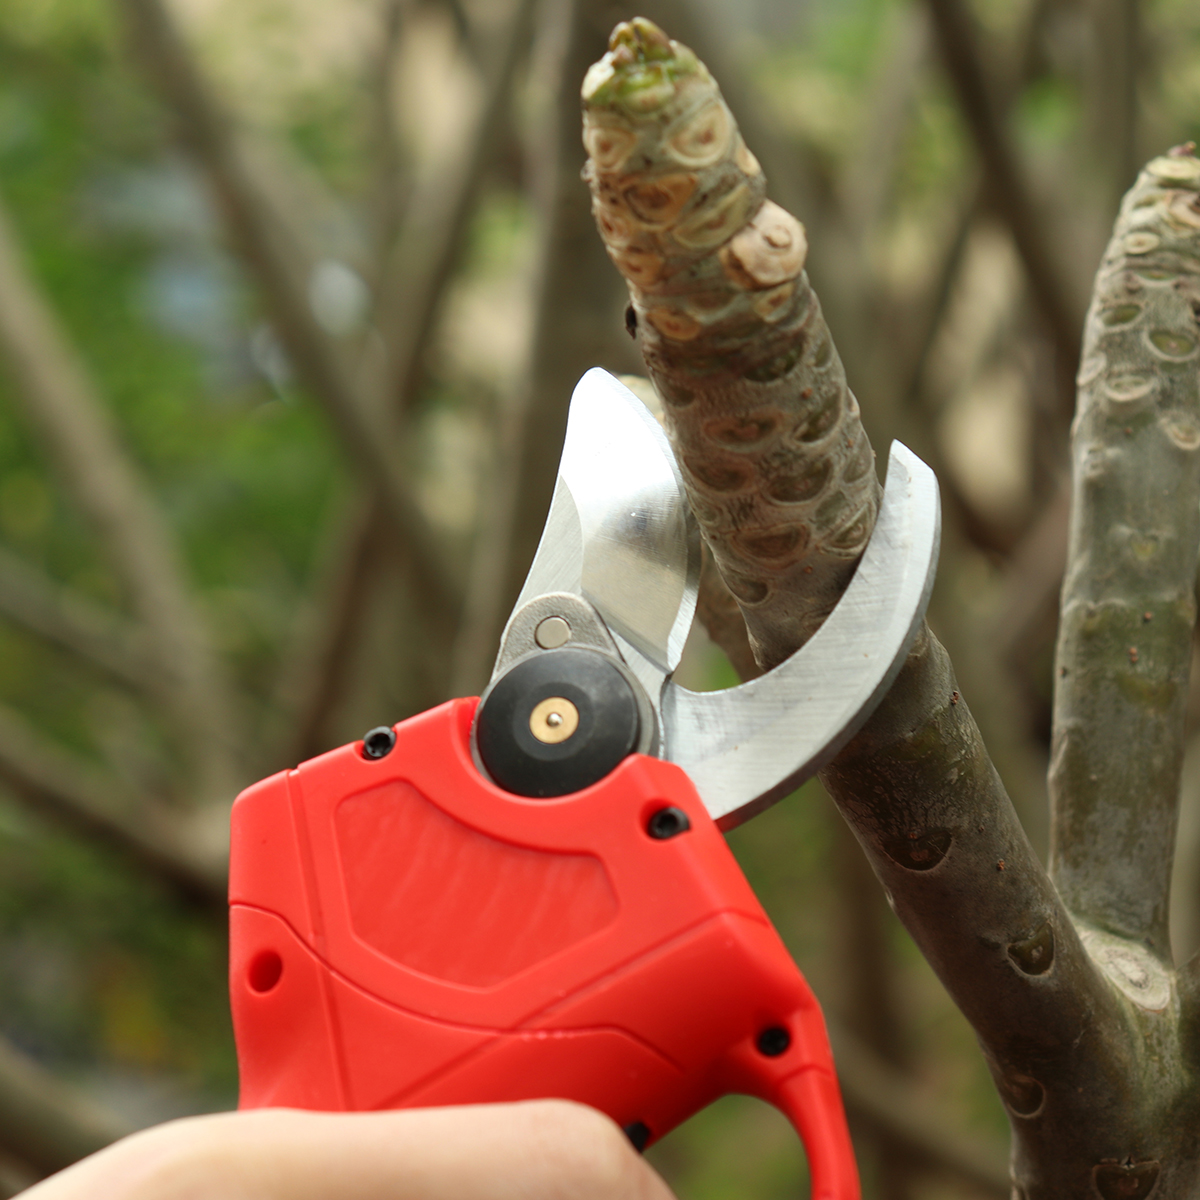 21V-Electric-Pruning-Shears-Rechargeable-Garden-Branches-Scissors-Cutter-Tree-Trimming-Cutting-Tool--1665439-3